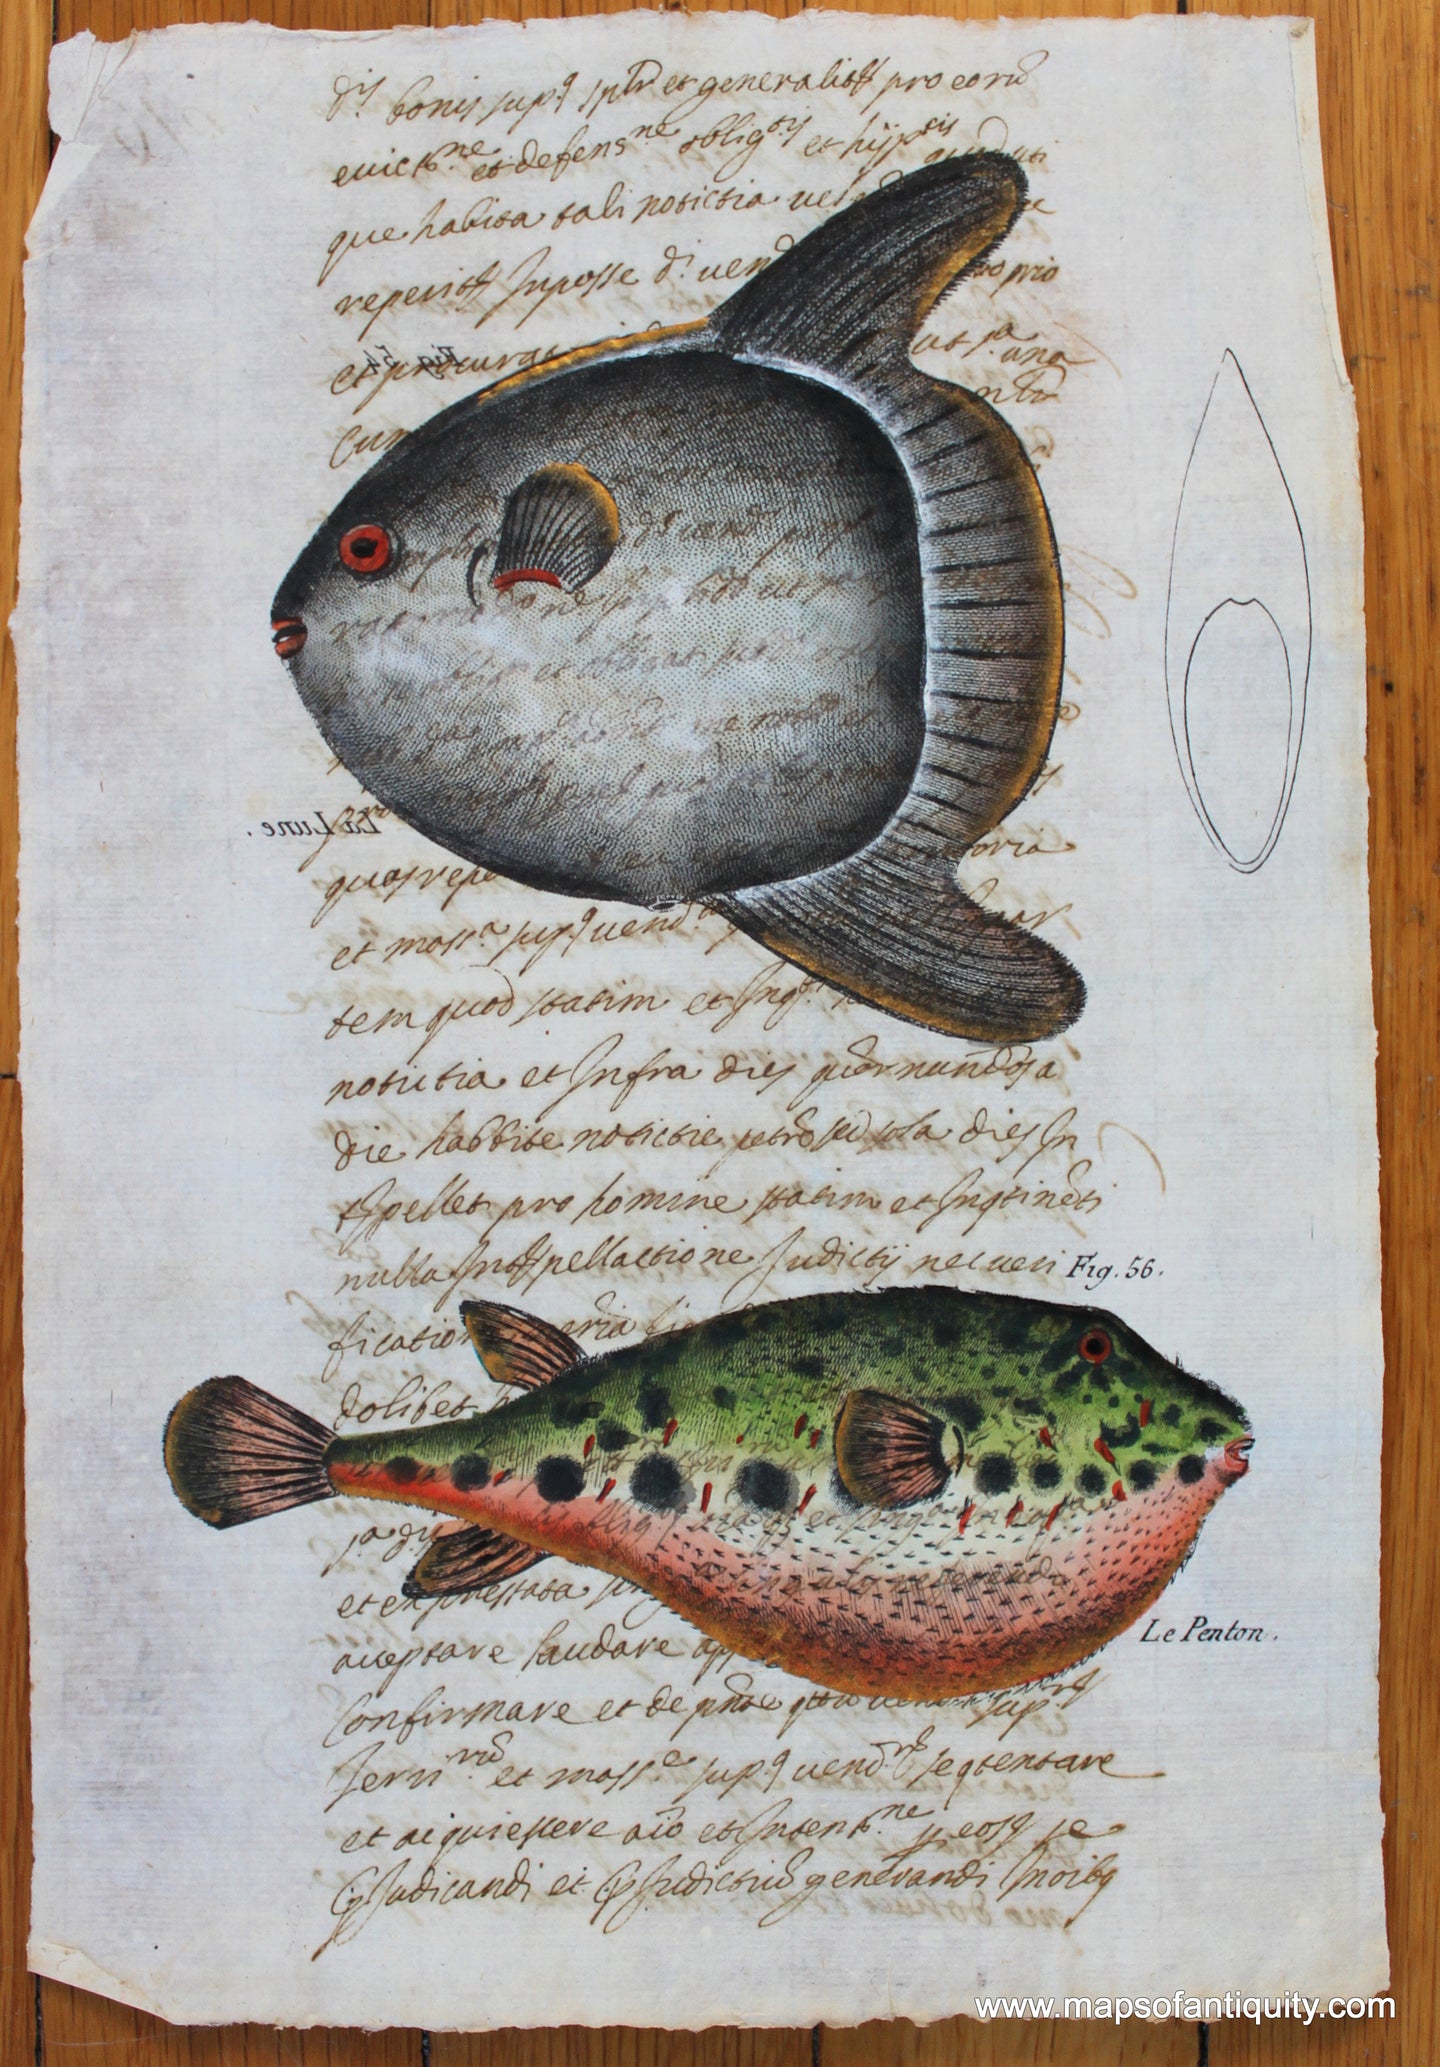 Digitally-Engraved-Specialty-Reproduction-Fish---Reproduction-on-Antique-Paper-Digitally-Engraved-Specialty-Reproductions----Maps-Of-Antiquity-1800s-19th-century